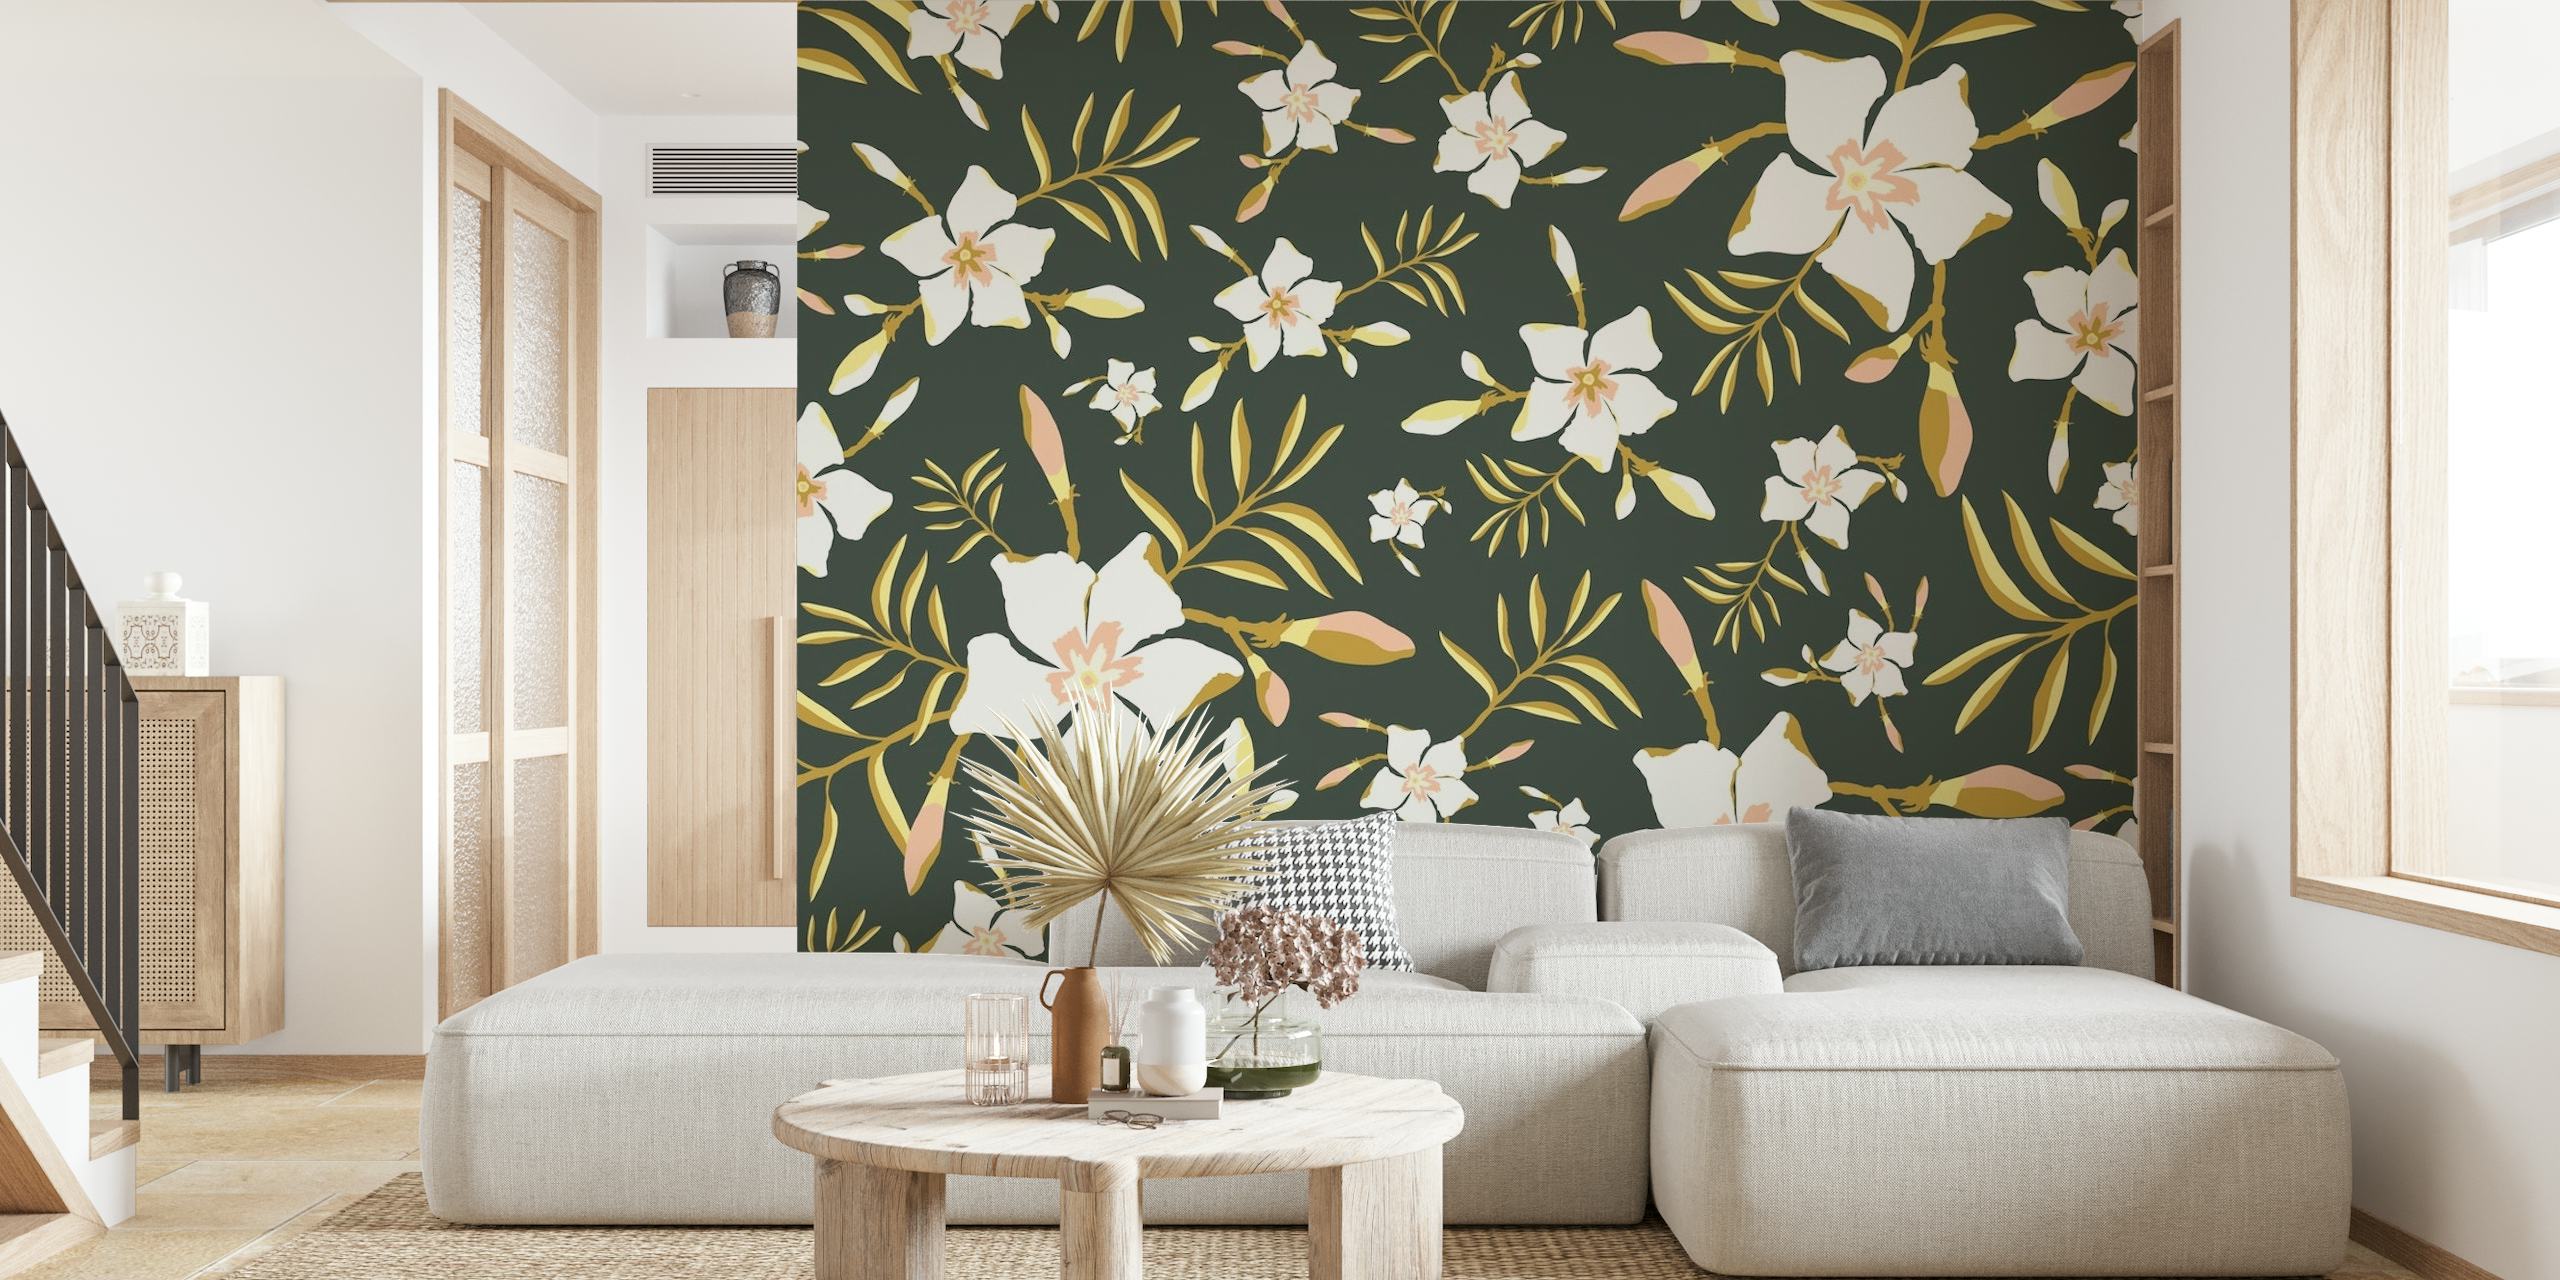 Tropical Floral Green wall mural with lush foliage and white flowers on a dark background